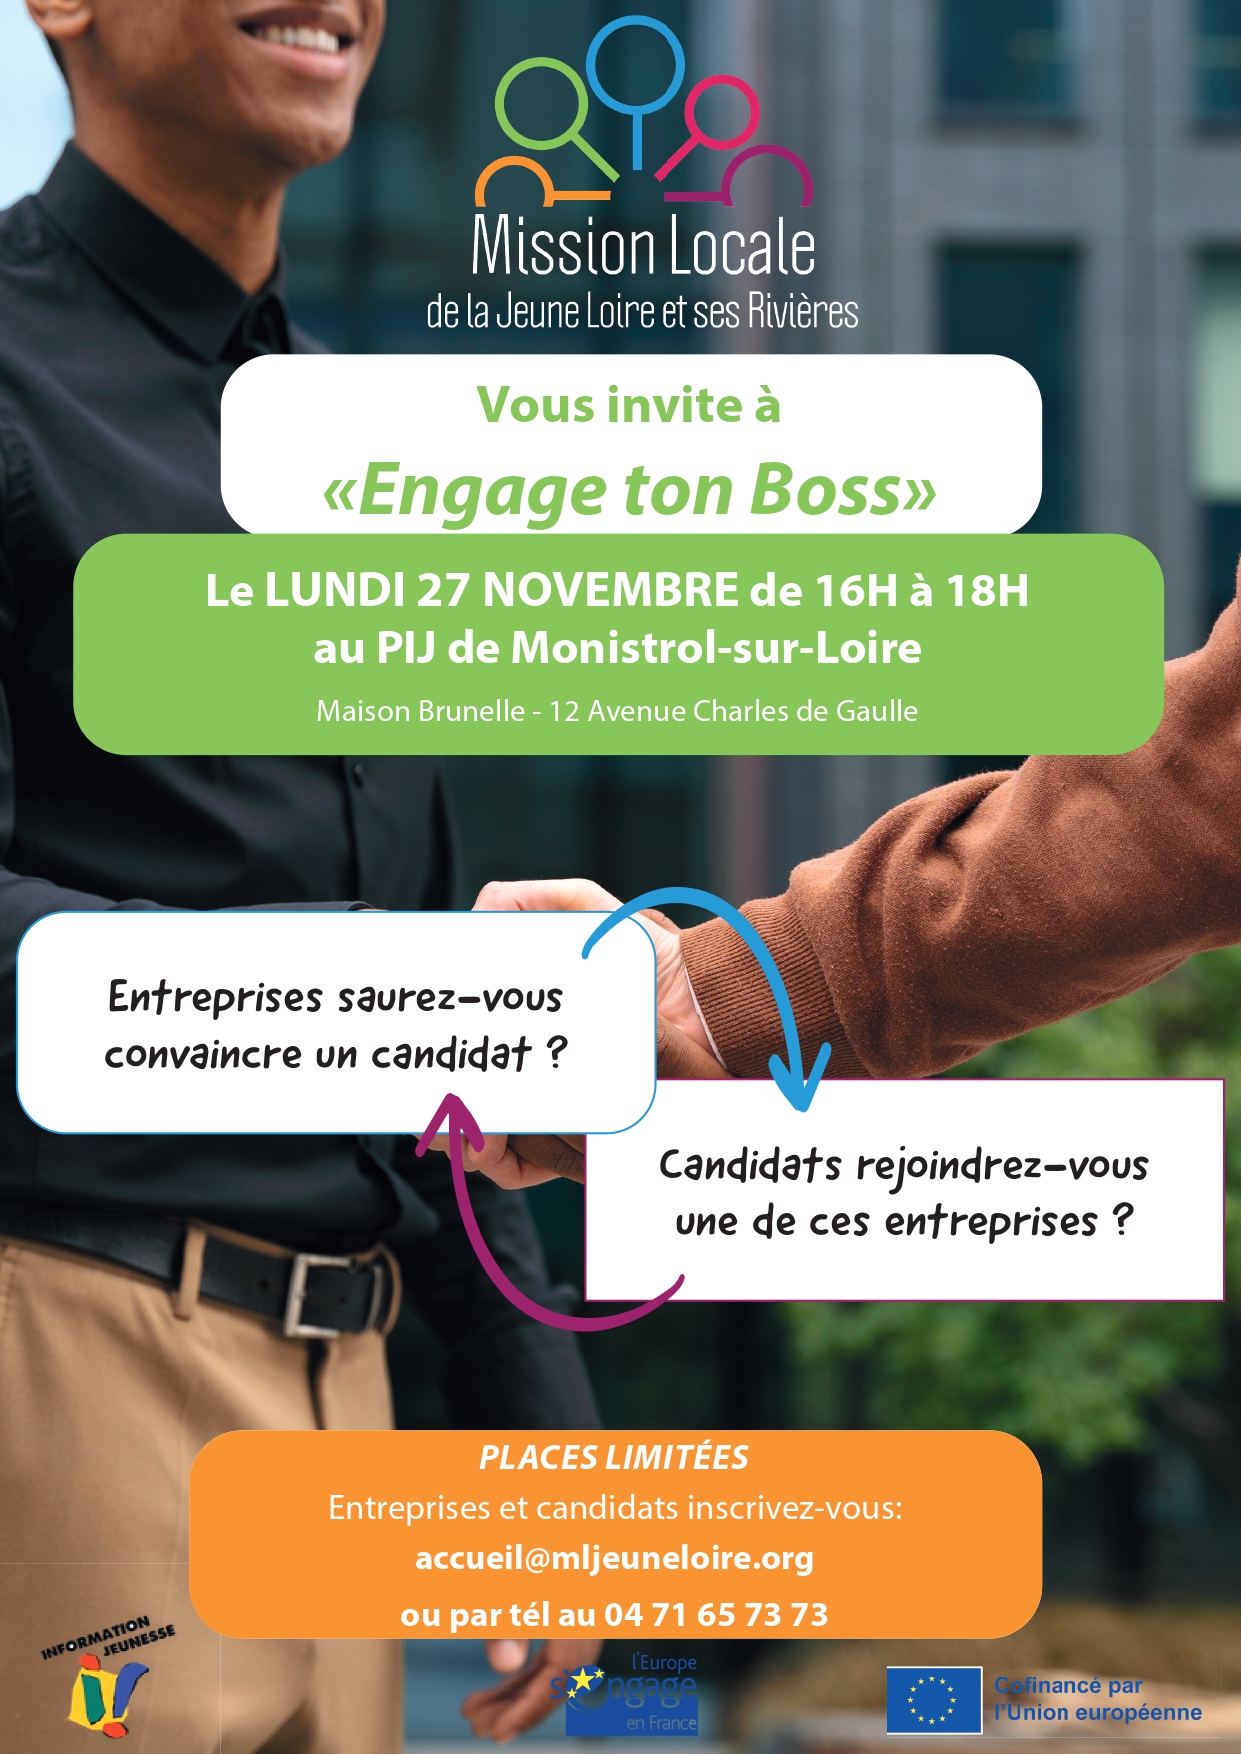 You are currently viewing Engage ton Boss Aurec sur Loire